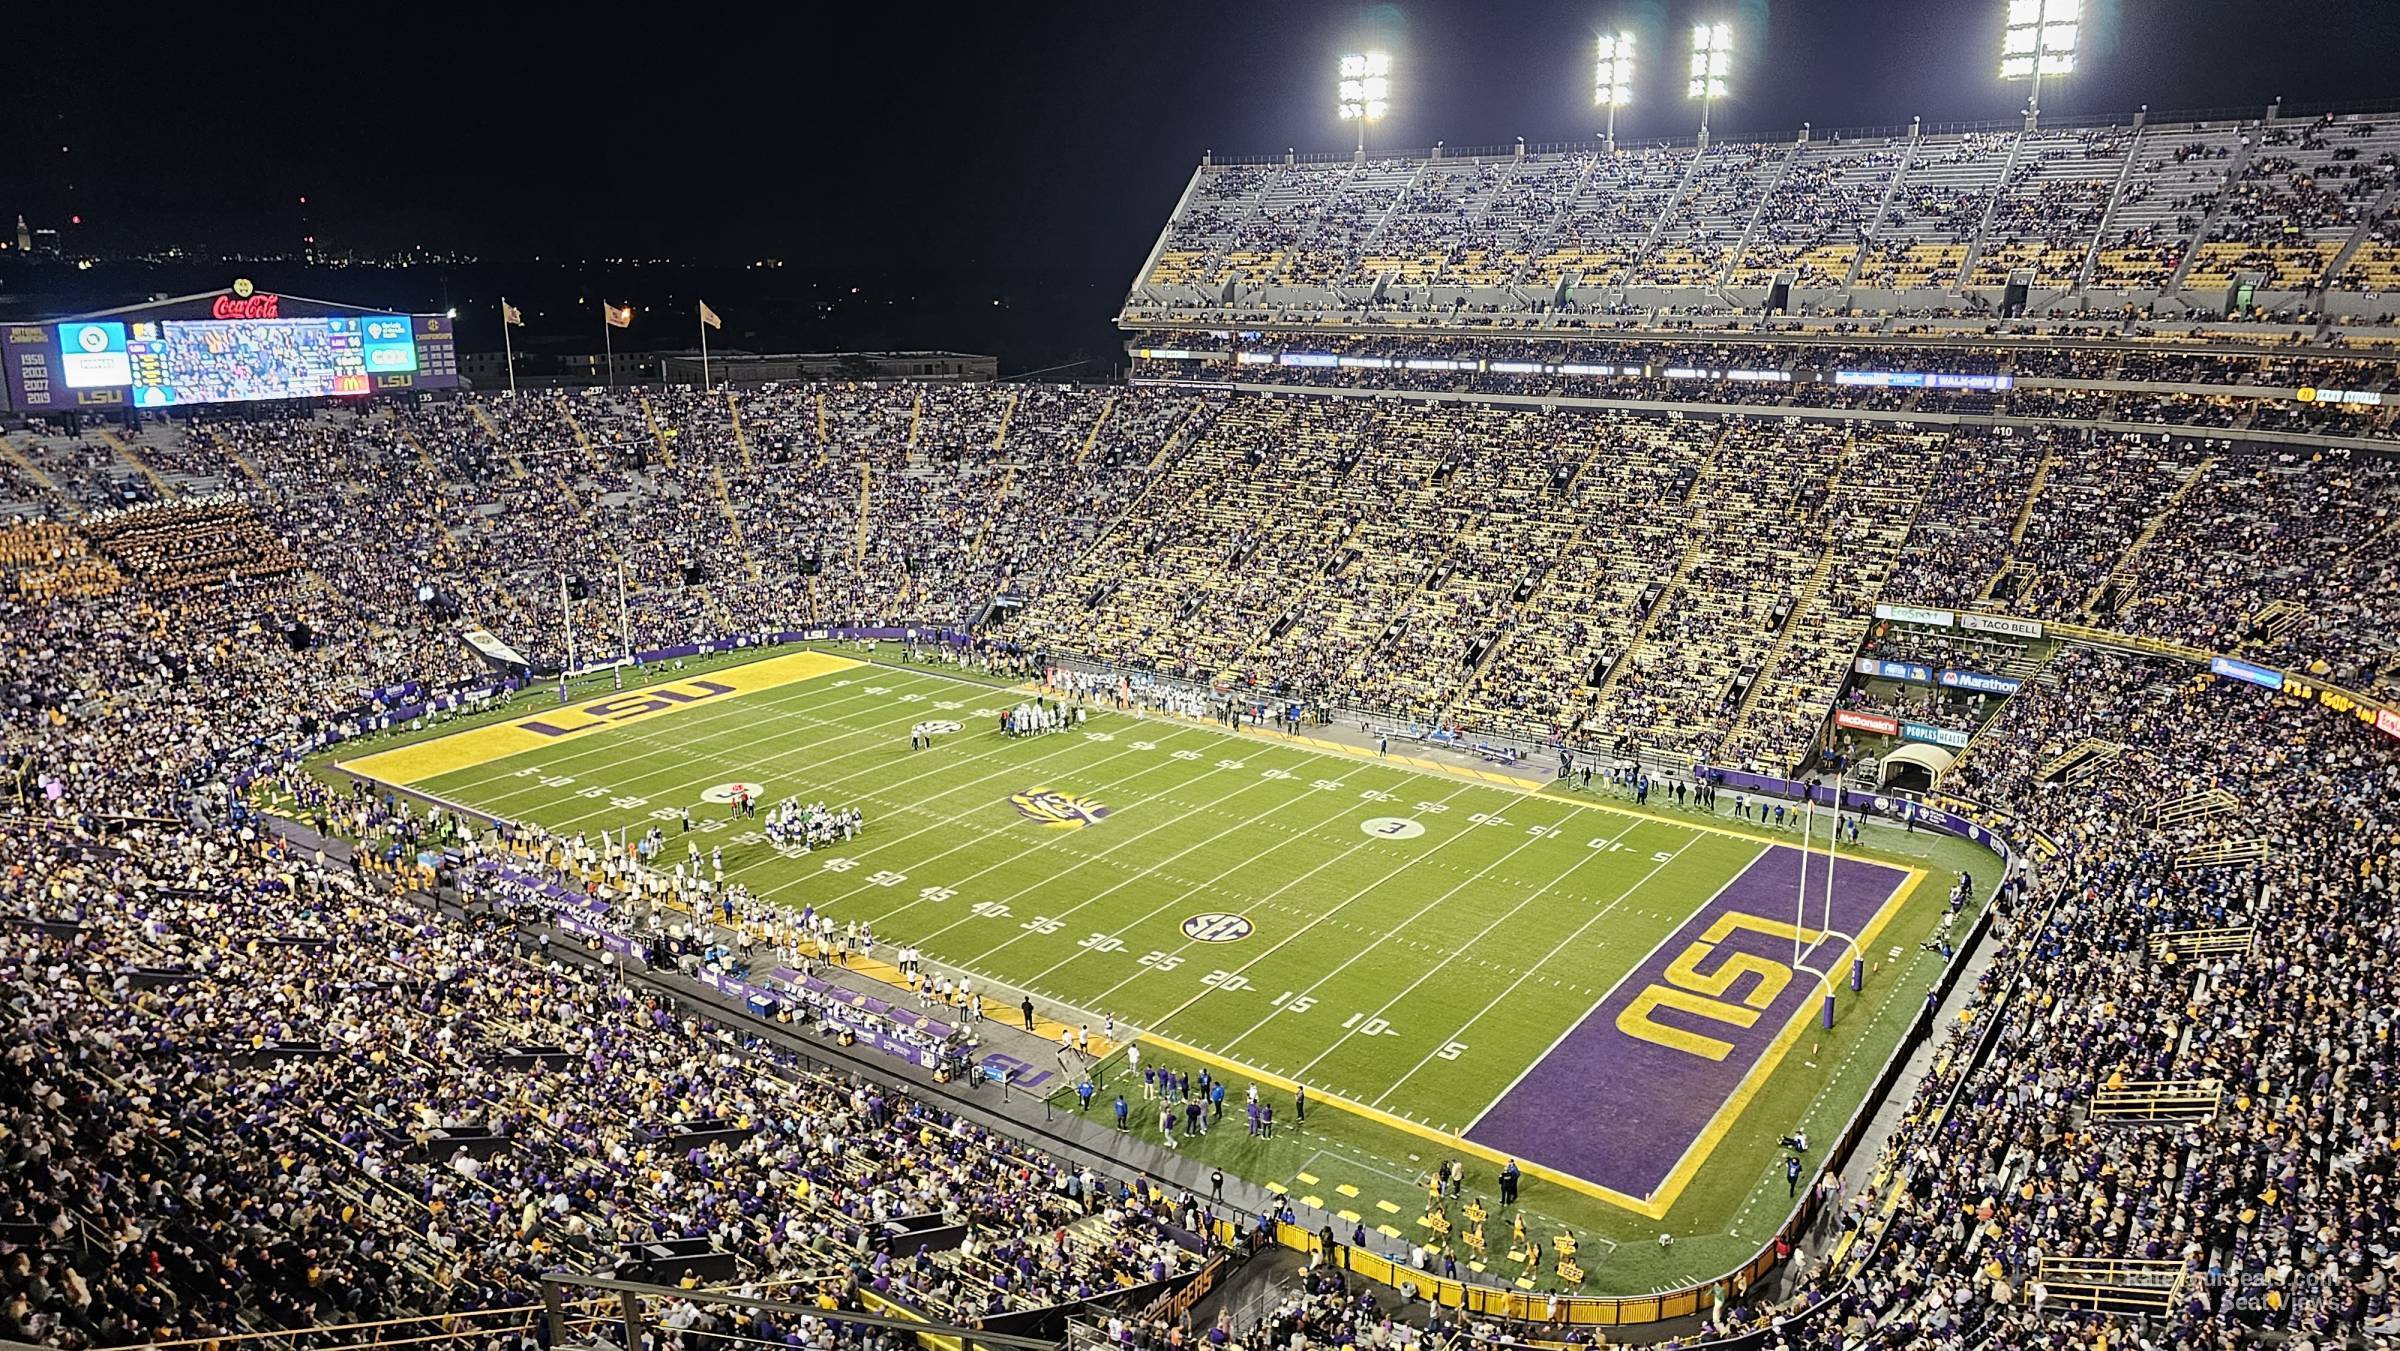 section 511, row 4 seat view  - tiger stadium